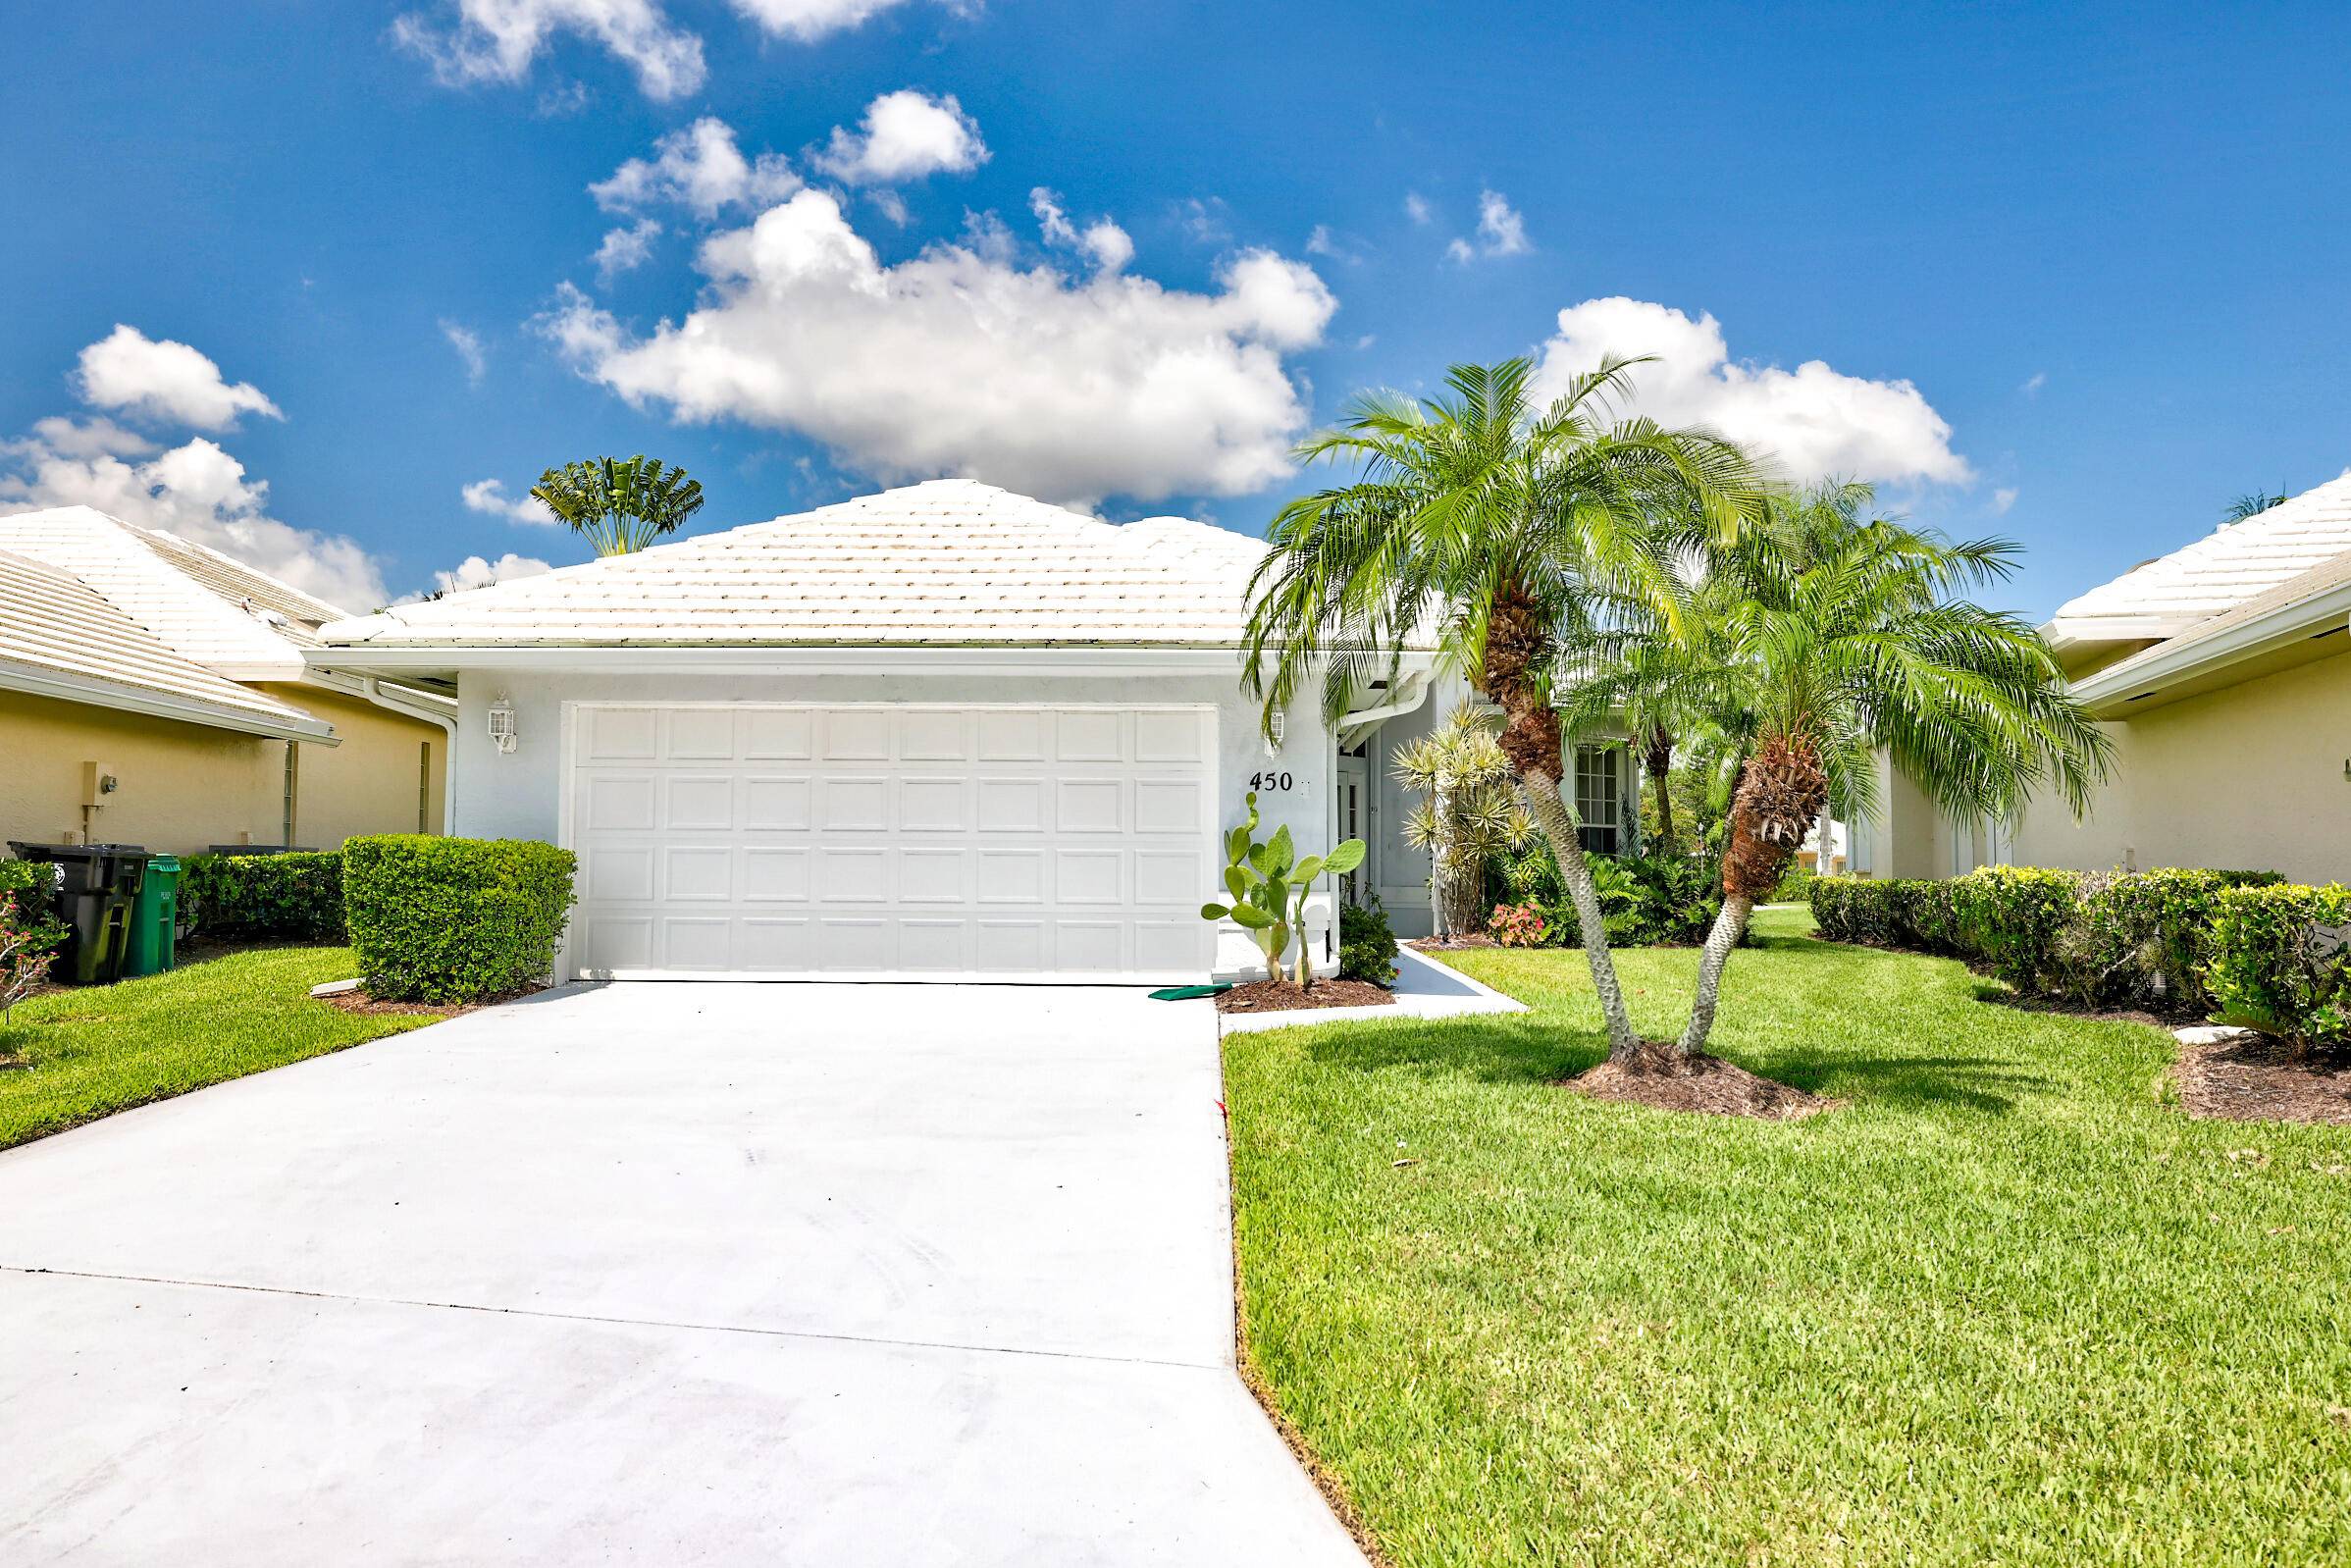 Move in ready ! 2B 2B 2G Den in the heart of St Lucie West.